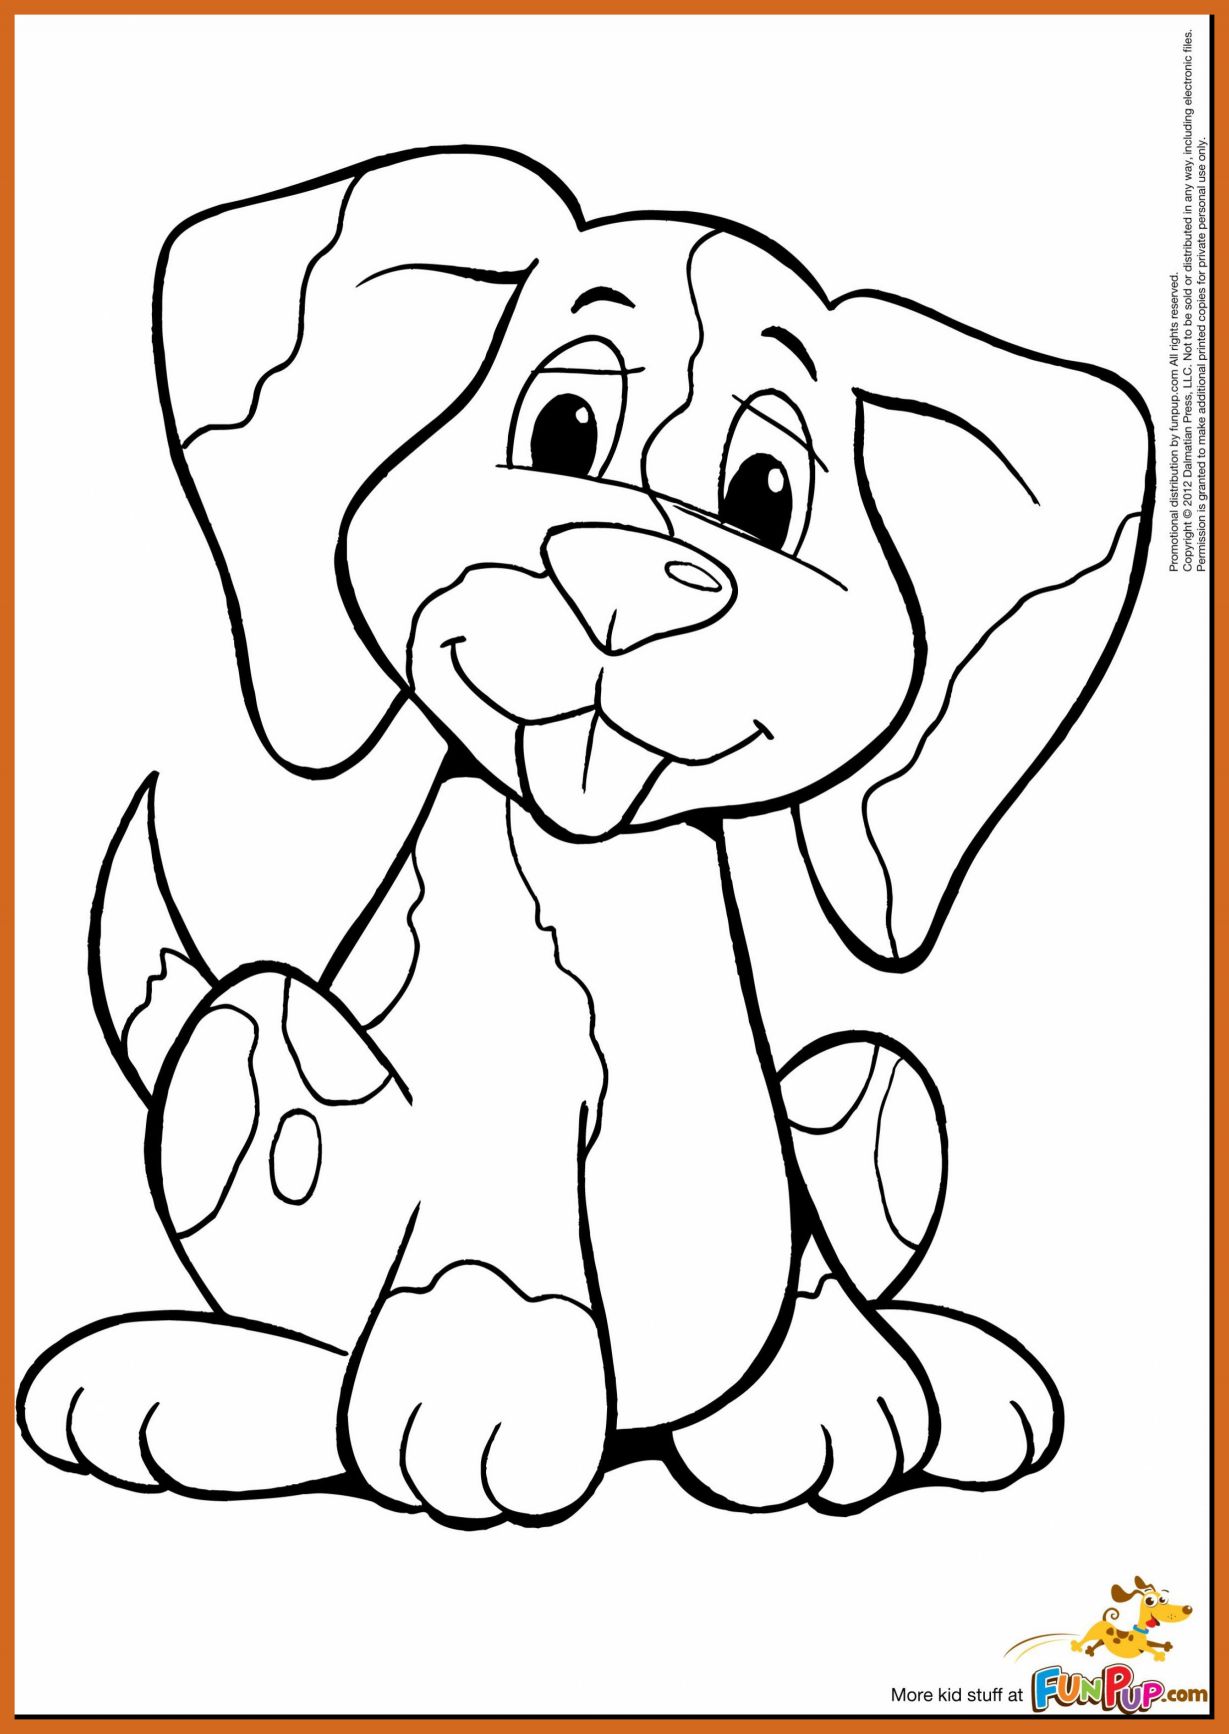 Yorkie Dog Coloring Pages at GetColorings.com | Free printable